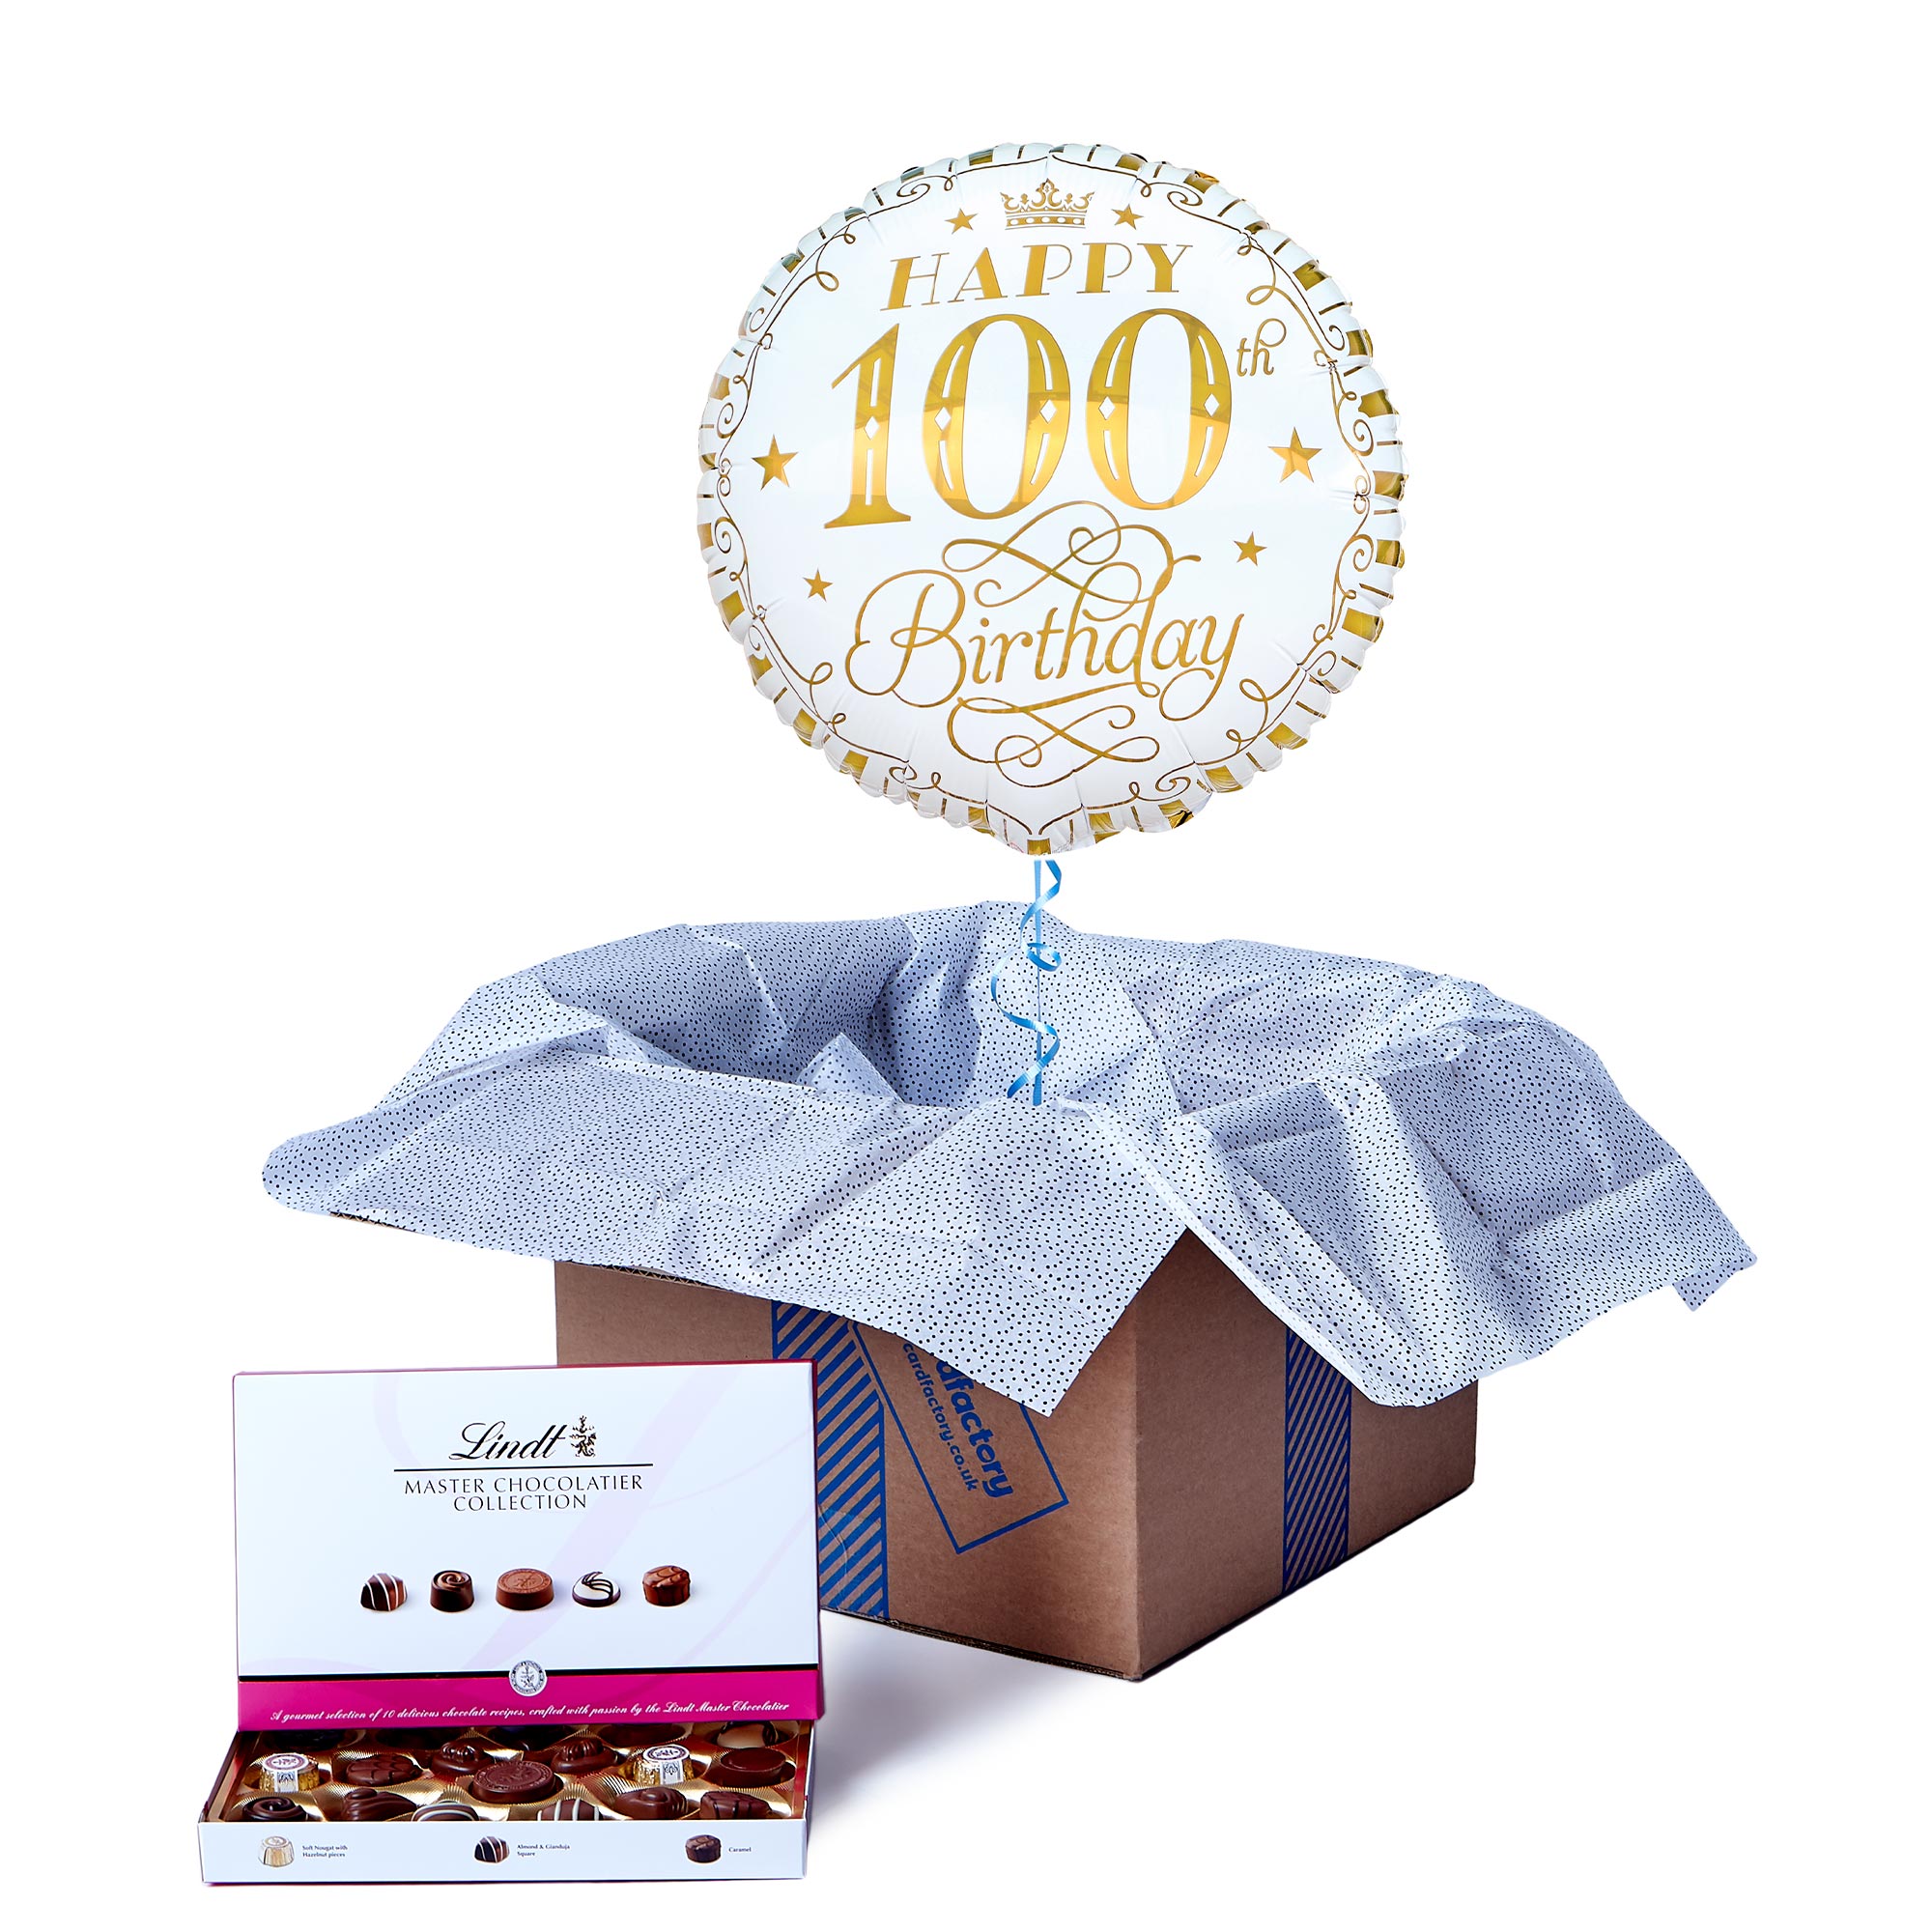 White & Gold 100th Birthday Balloon & Lindt Chocolates - FREE GIFT CARD!